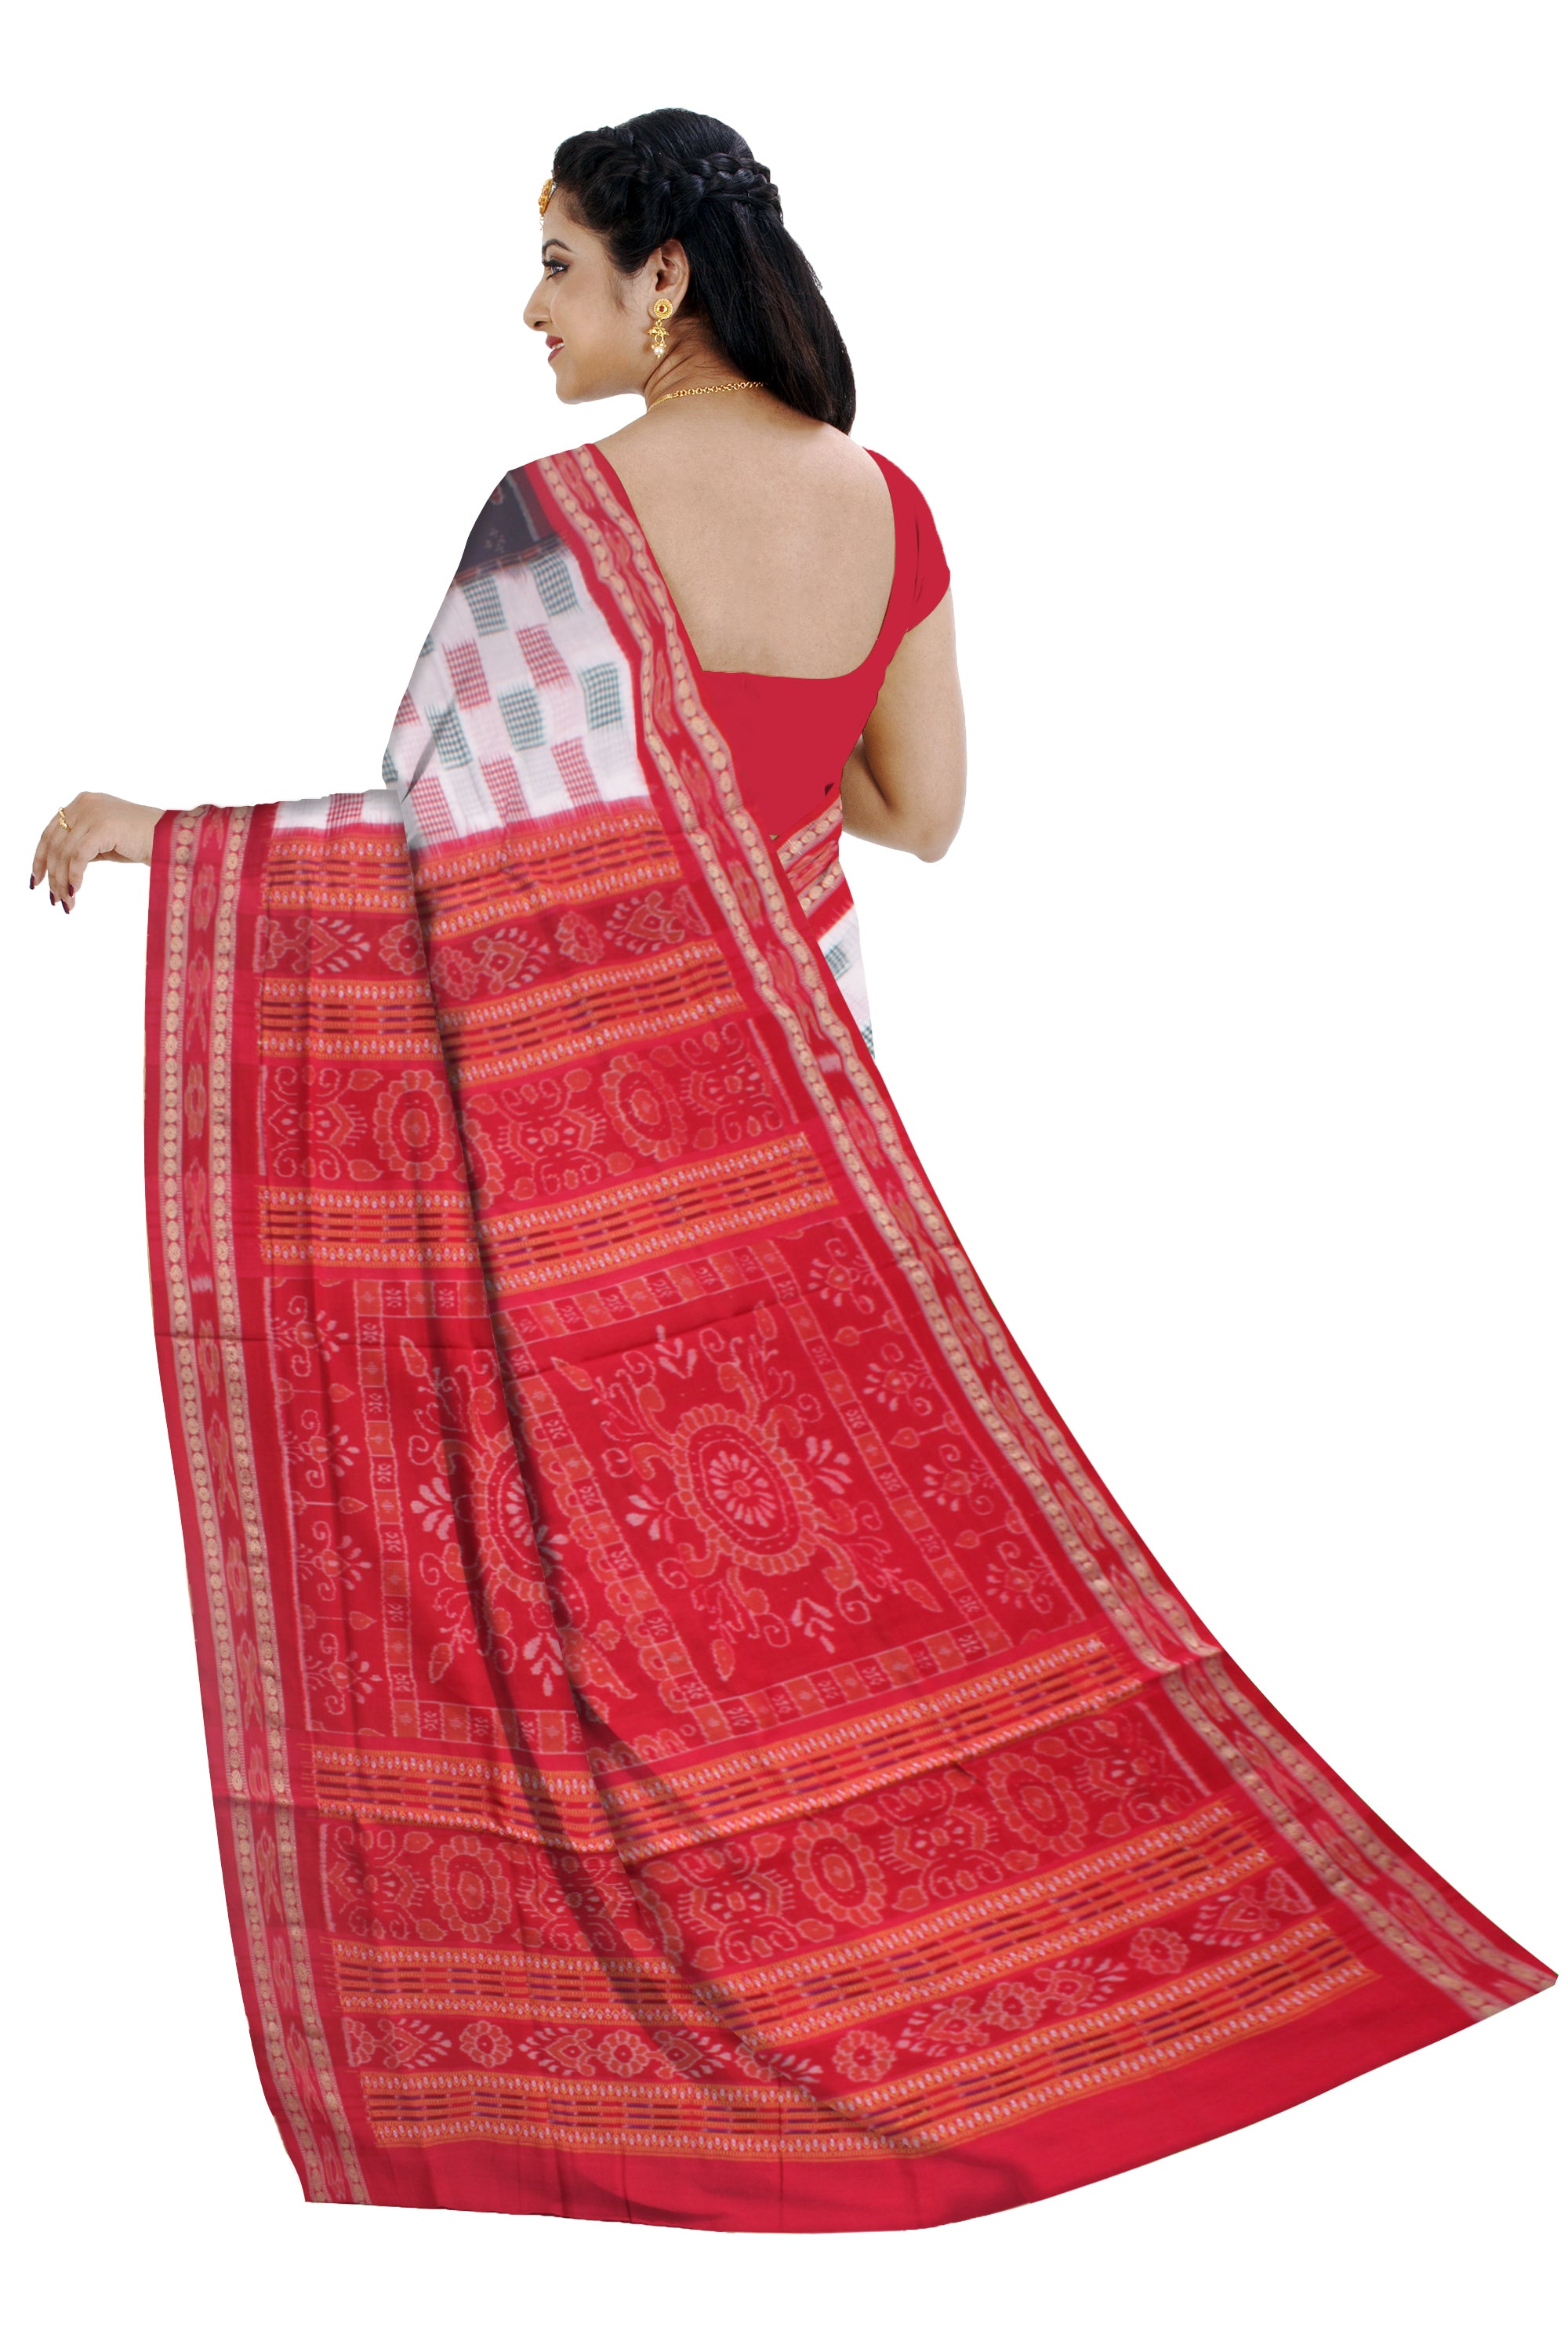 WHITE, BLACK AND RED COLOR PURE COTTON SAREE , WITH OUT BLOUSE PIECE. - Koshali Arts & Crafts Enterprise